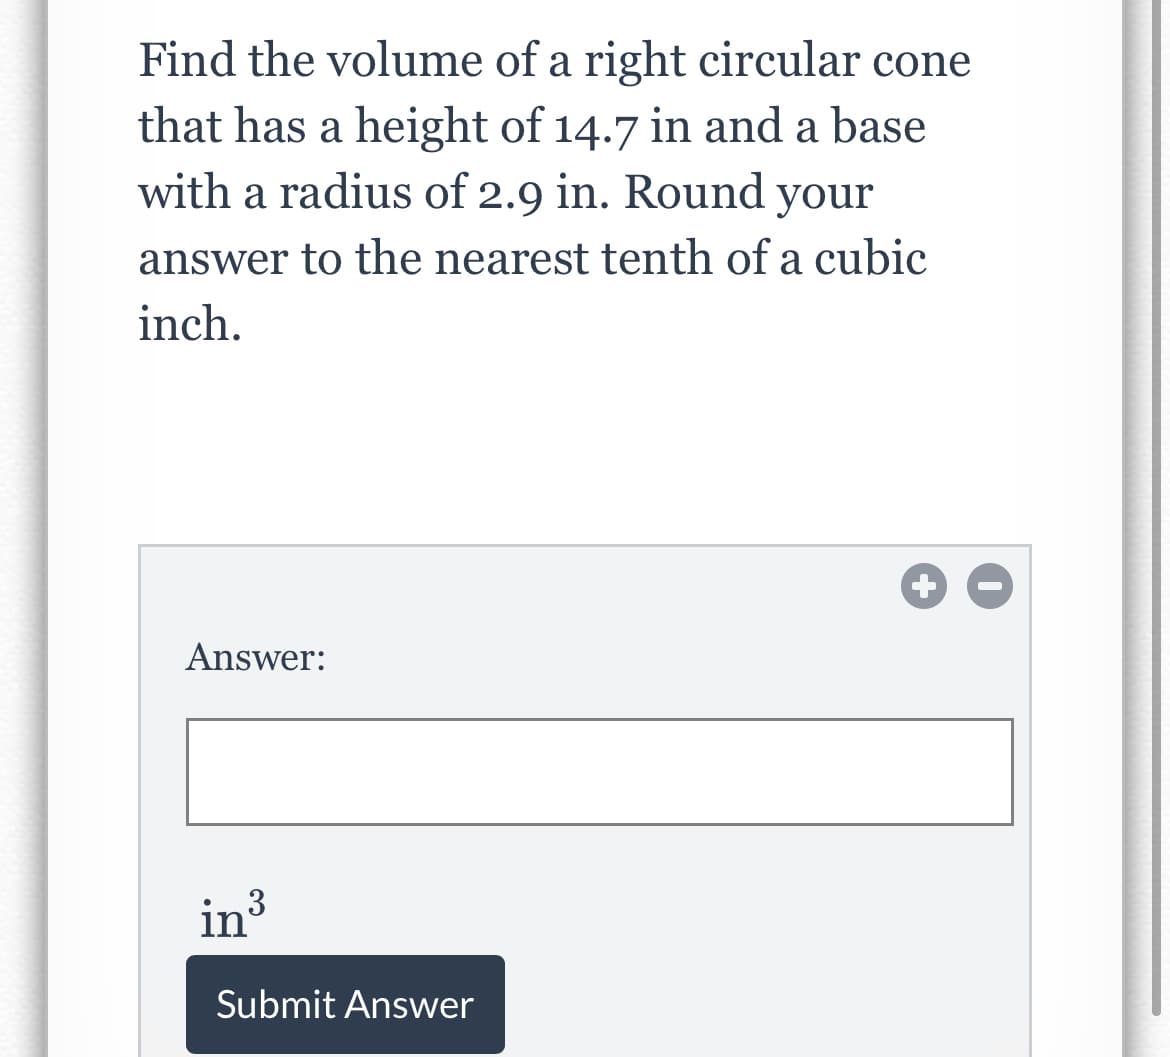 Find the volume of a right circular cone
that has a height of 14.7 in and a base
with a radius of 2.9 in. Round your
answer to the nearest tenth of a cubic
inch.
Answer:
in
Submit Answer
